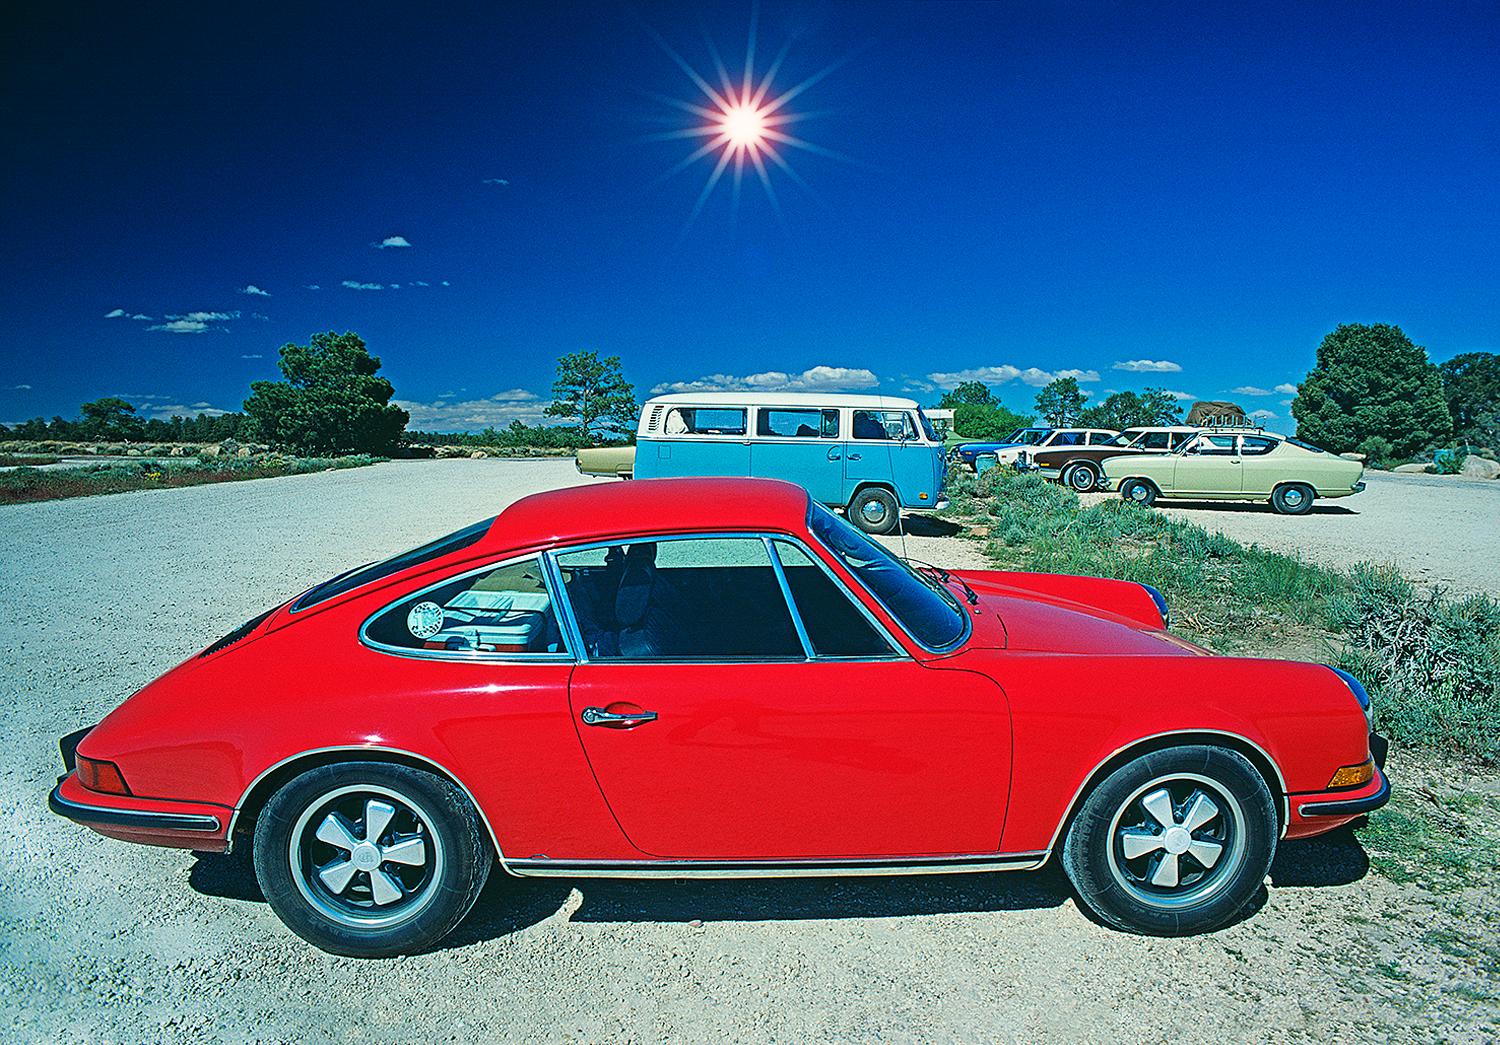 Mitchell Funk Color Photograph - Vintage Red Porsche with Classic Volkswagen Mini Bus - Vintage Cars